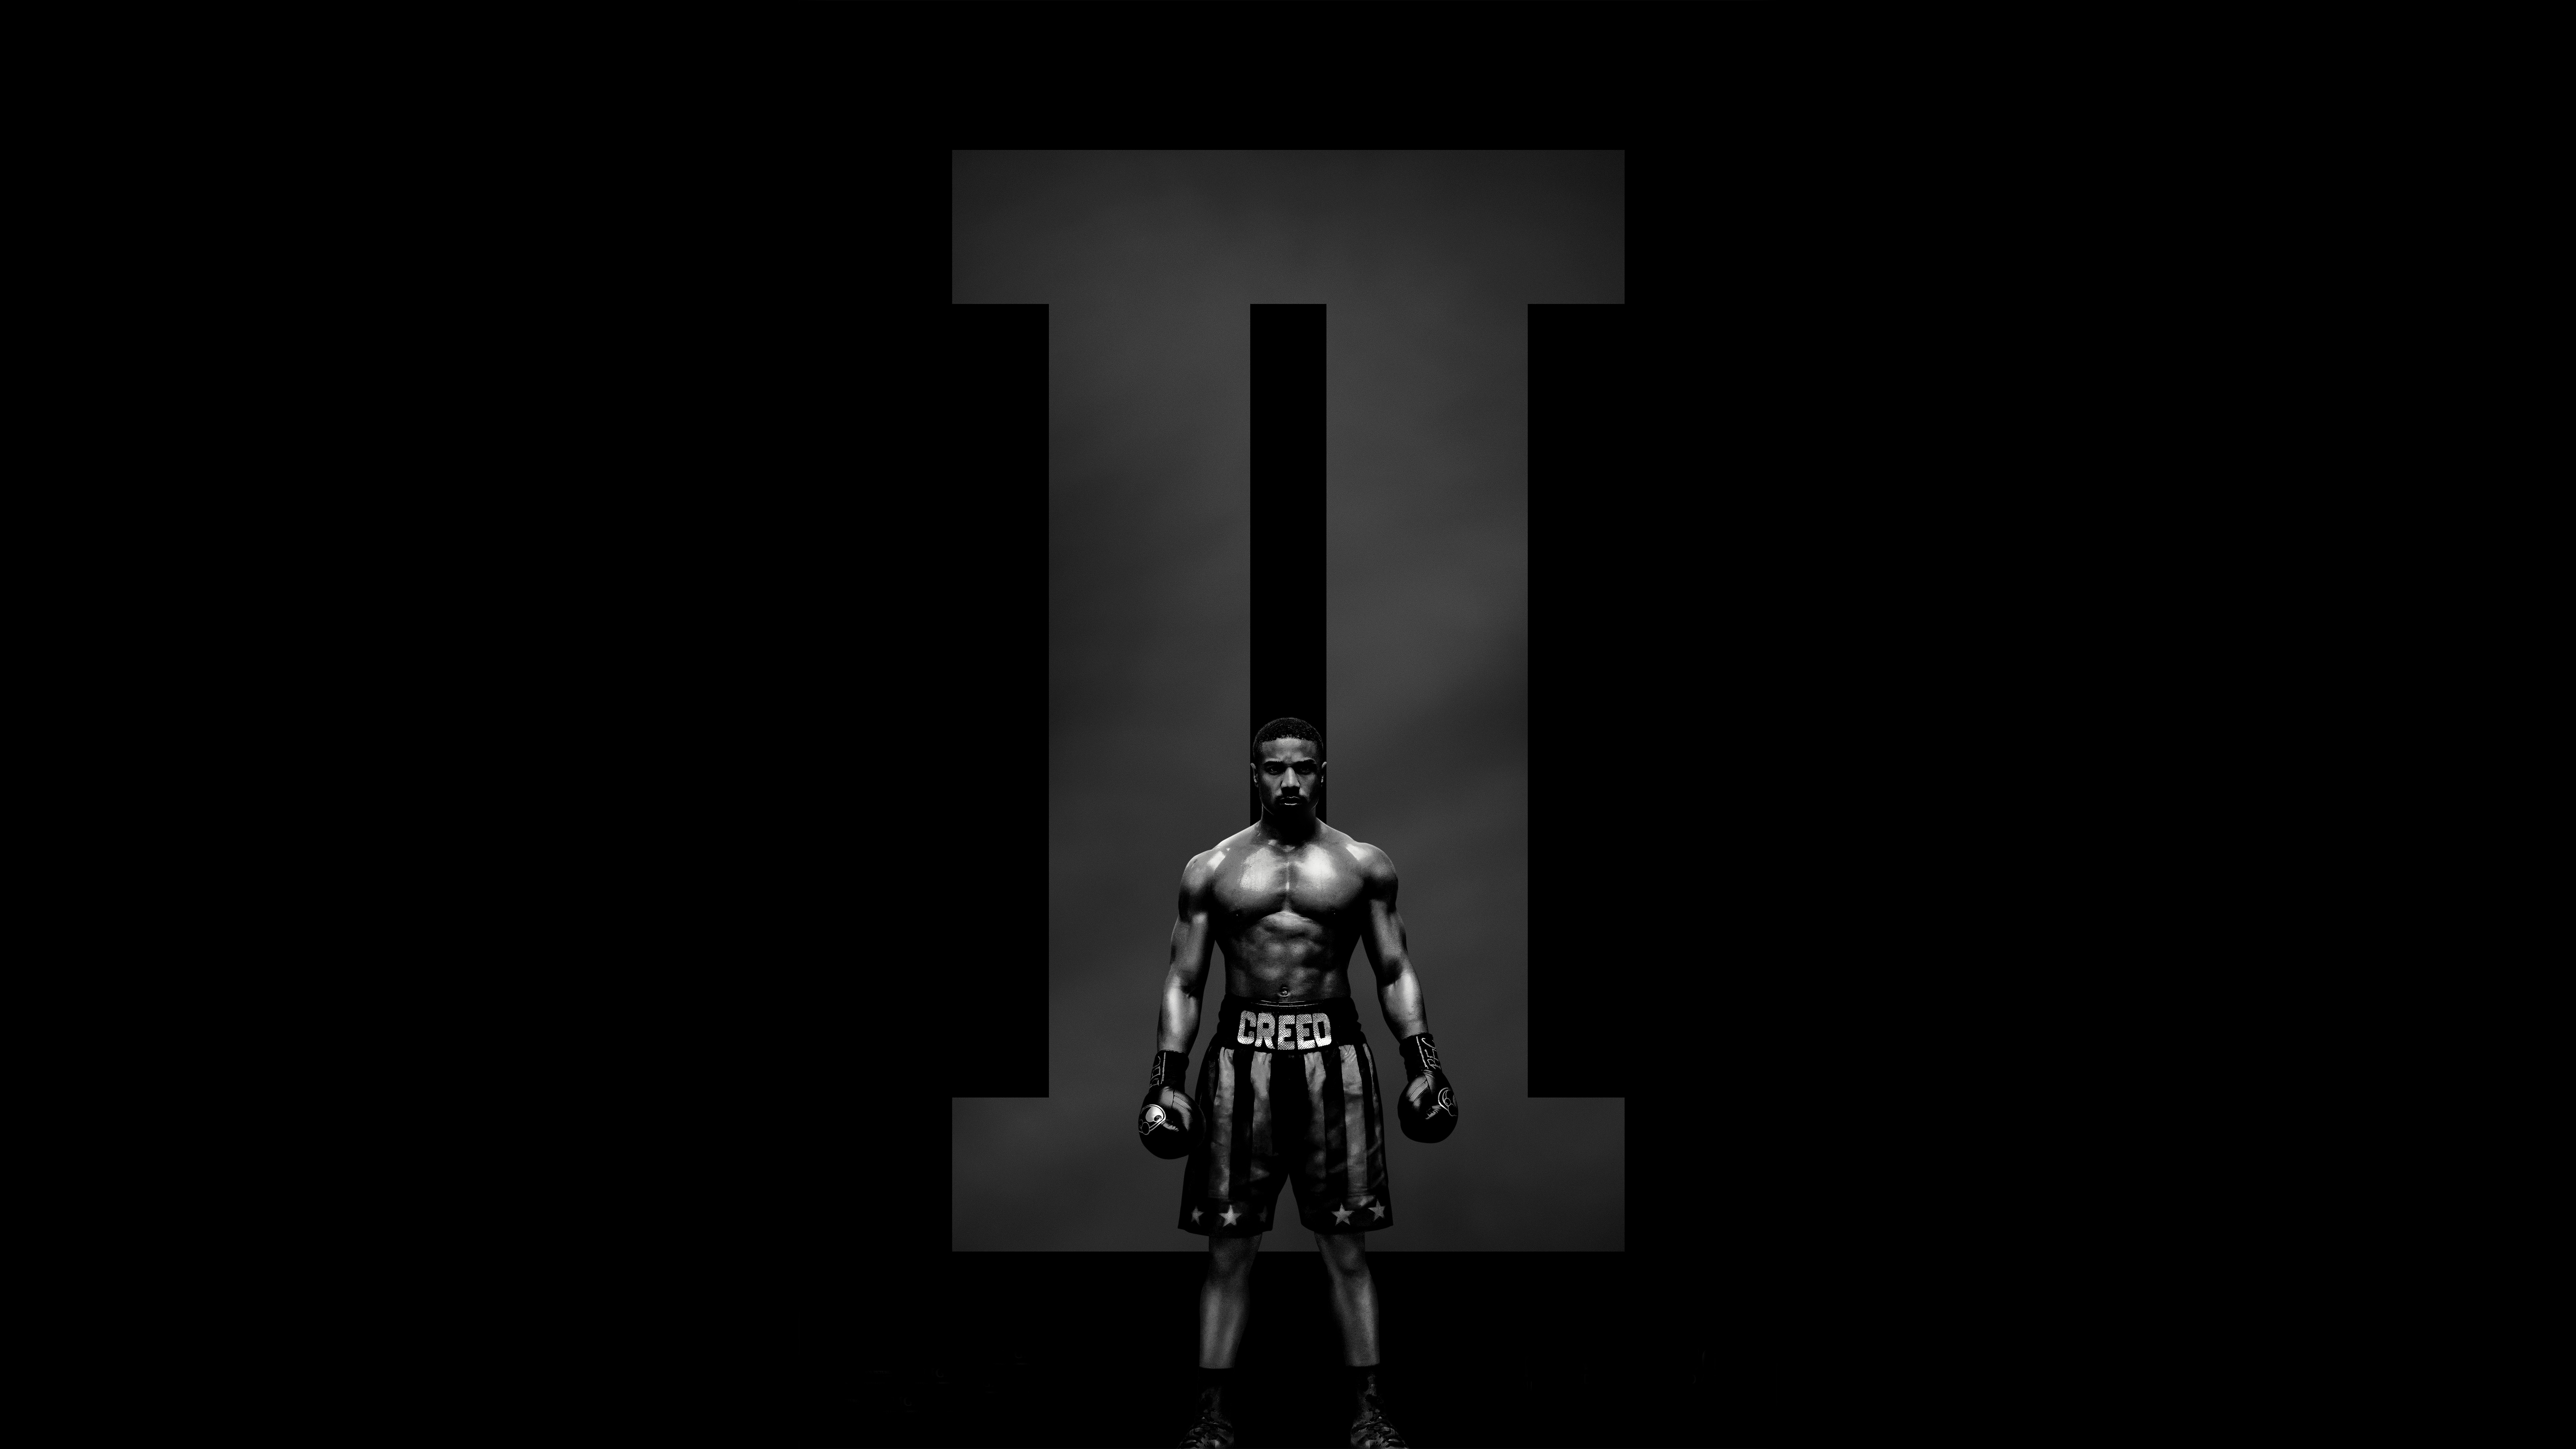 Popular Creed (Movie) Image for Phone